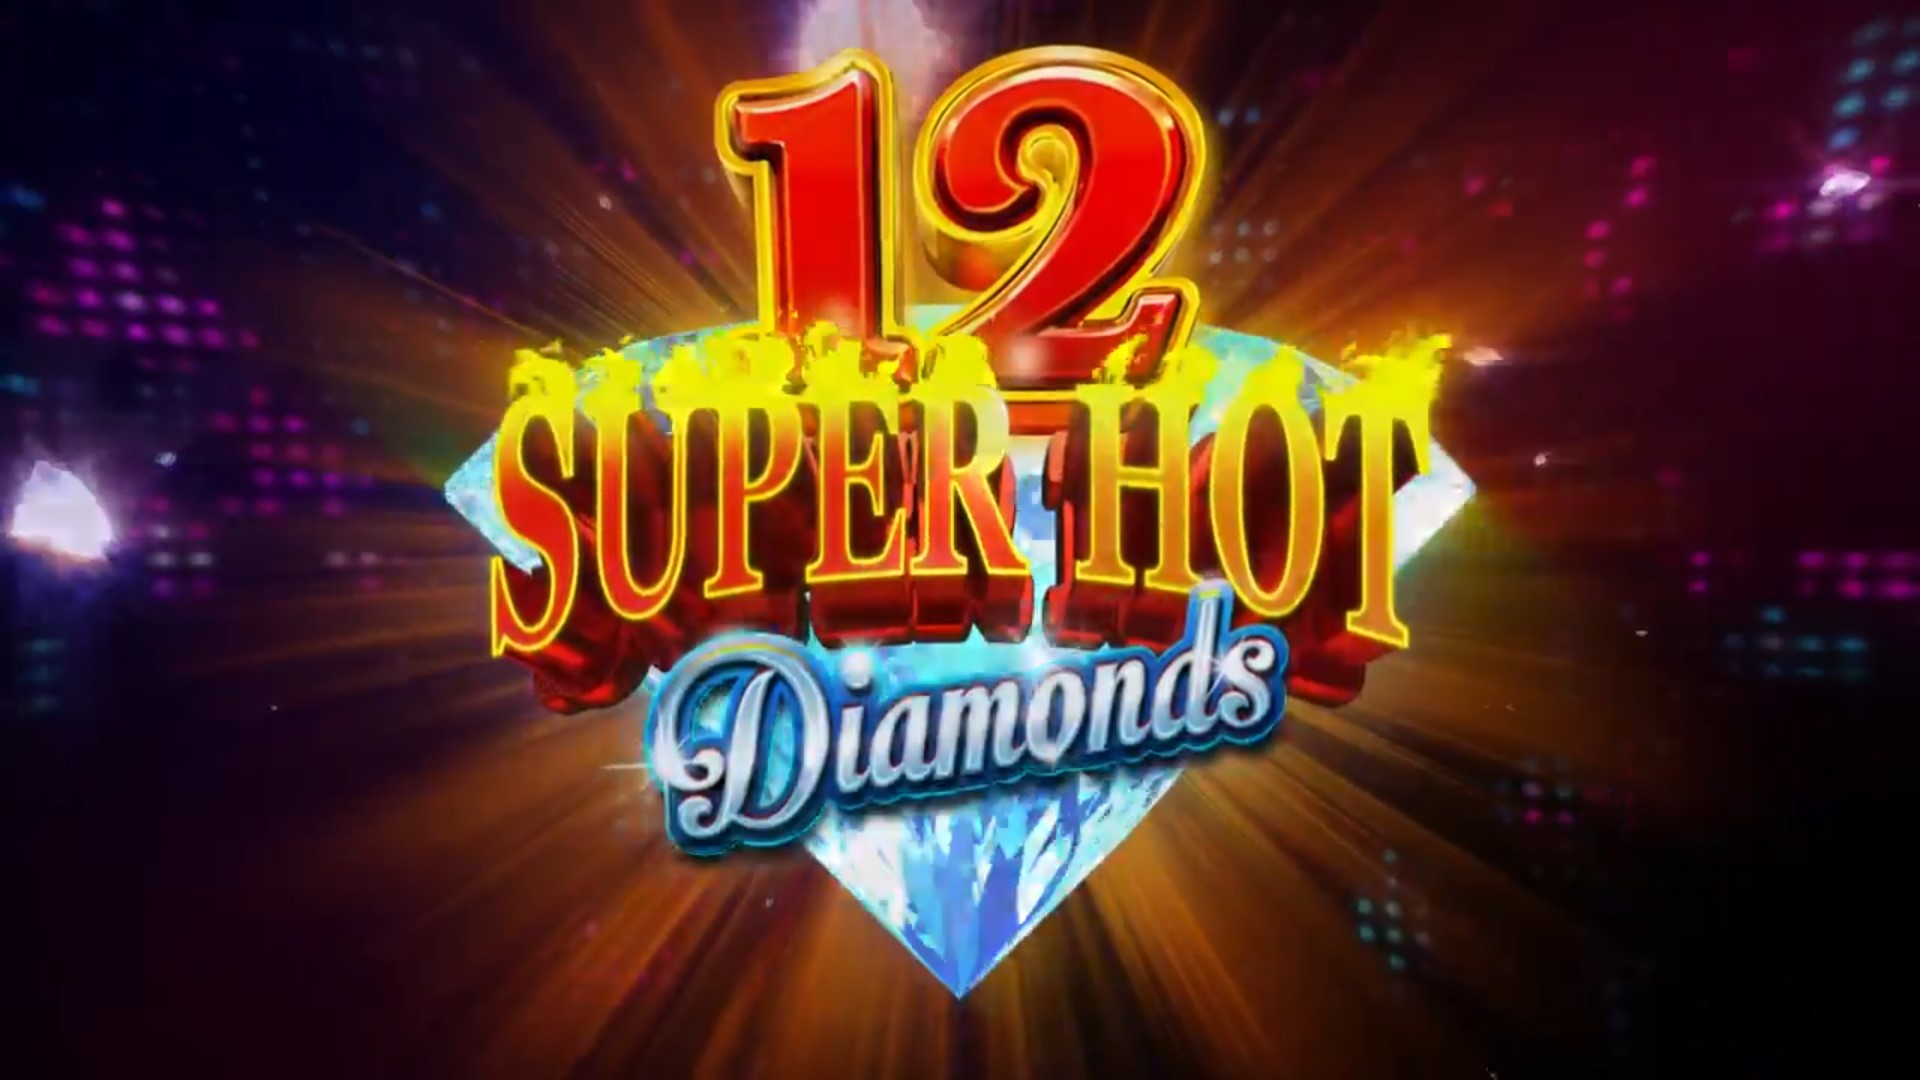 Wizard Games provides diamonds aplenty, without the need for players to gather their pickaxe and mining gear, in 12 Super Hot Diamonds.